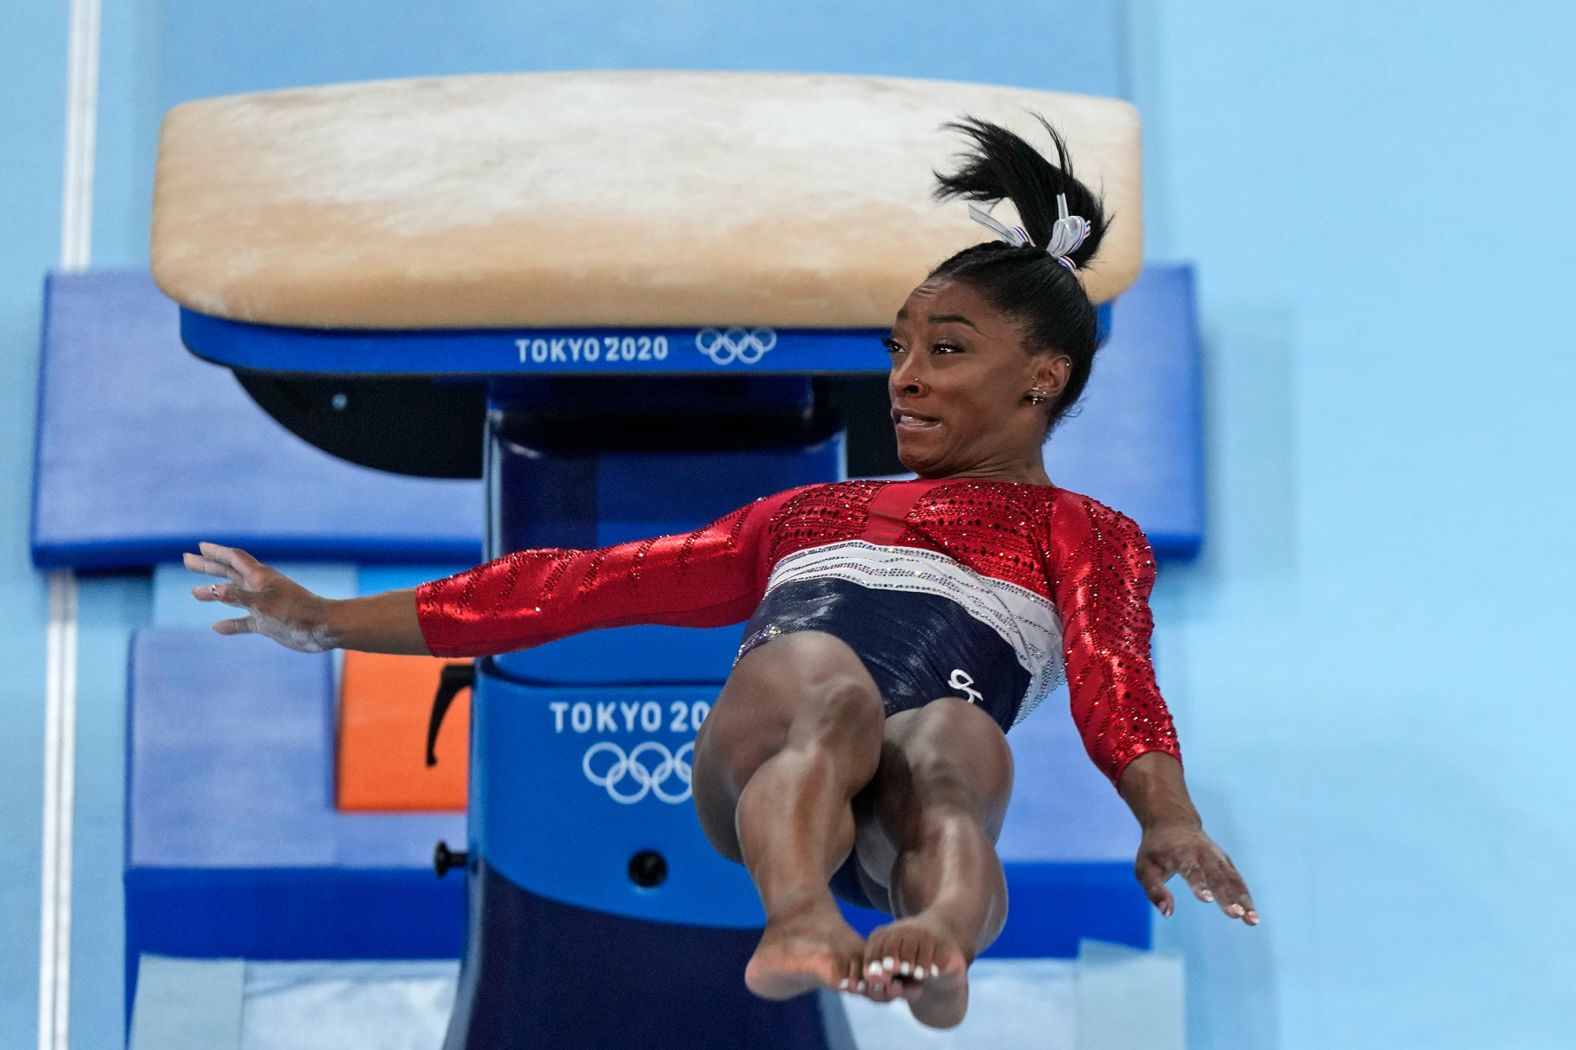 Biles lands awkwardly while competing in the team all-around at the Tokyo Olympics in July 2021. Biles stumbled on the vault landing and then <a href="index.php?page=&url=https%3A%2F%2Fwww.cnn.com%2Fworld%2Flive-news%2Ftokyo-2020-olympics-07-27-21-spt%2Fh_fbc139e365a8d111304aa45ddd4ed62b" target="_blank">pulled out of the competition</a> over mental-health concerns.